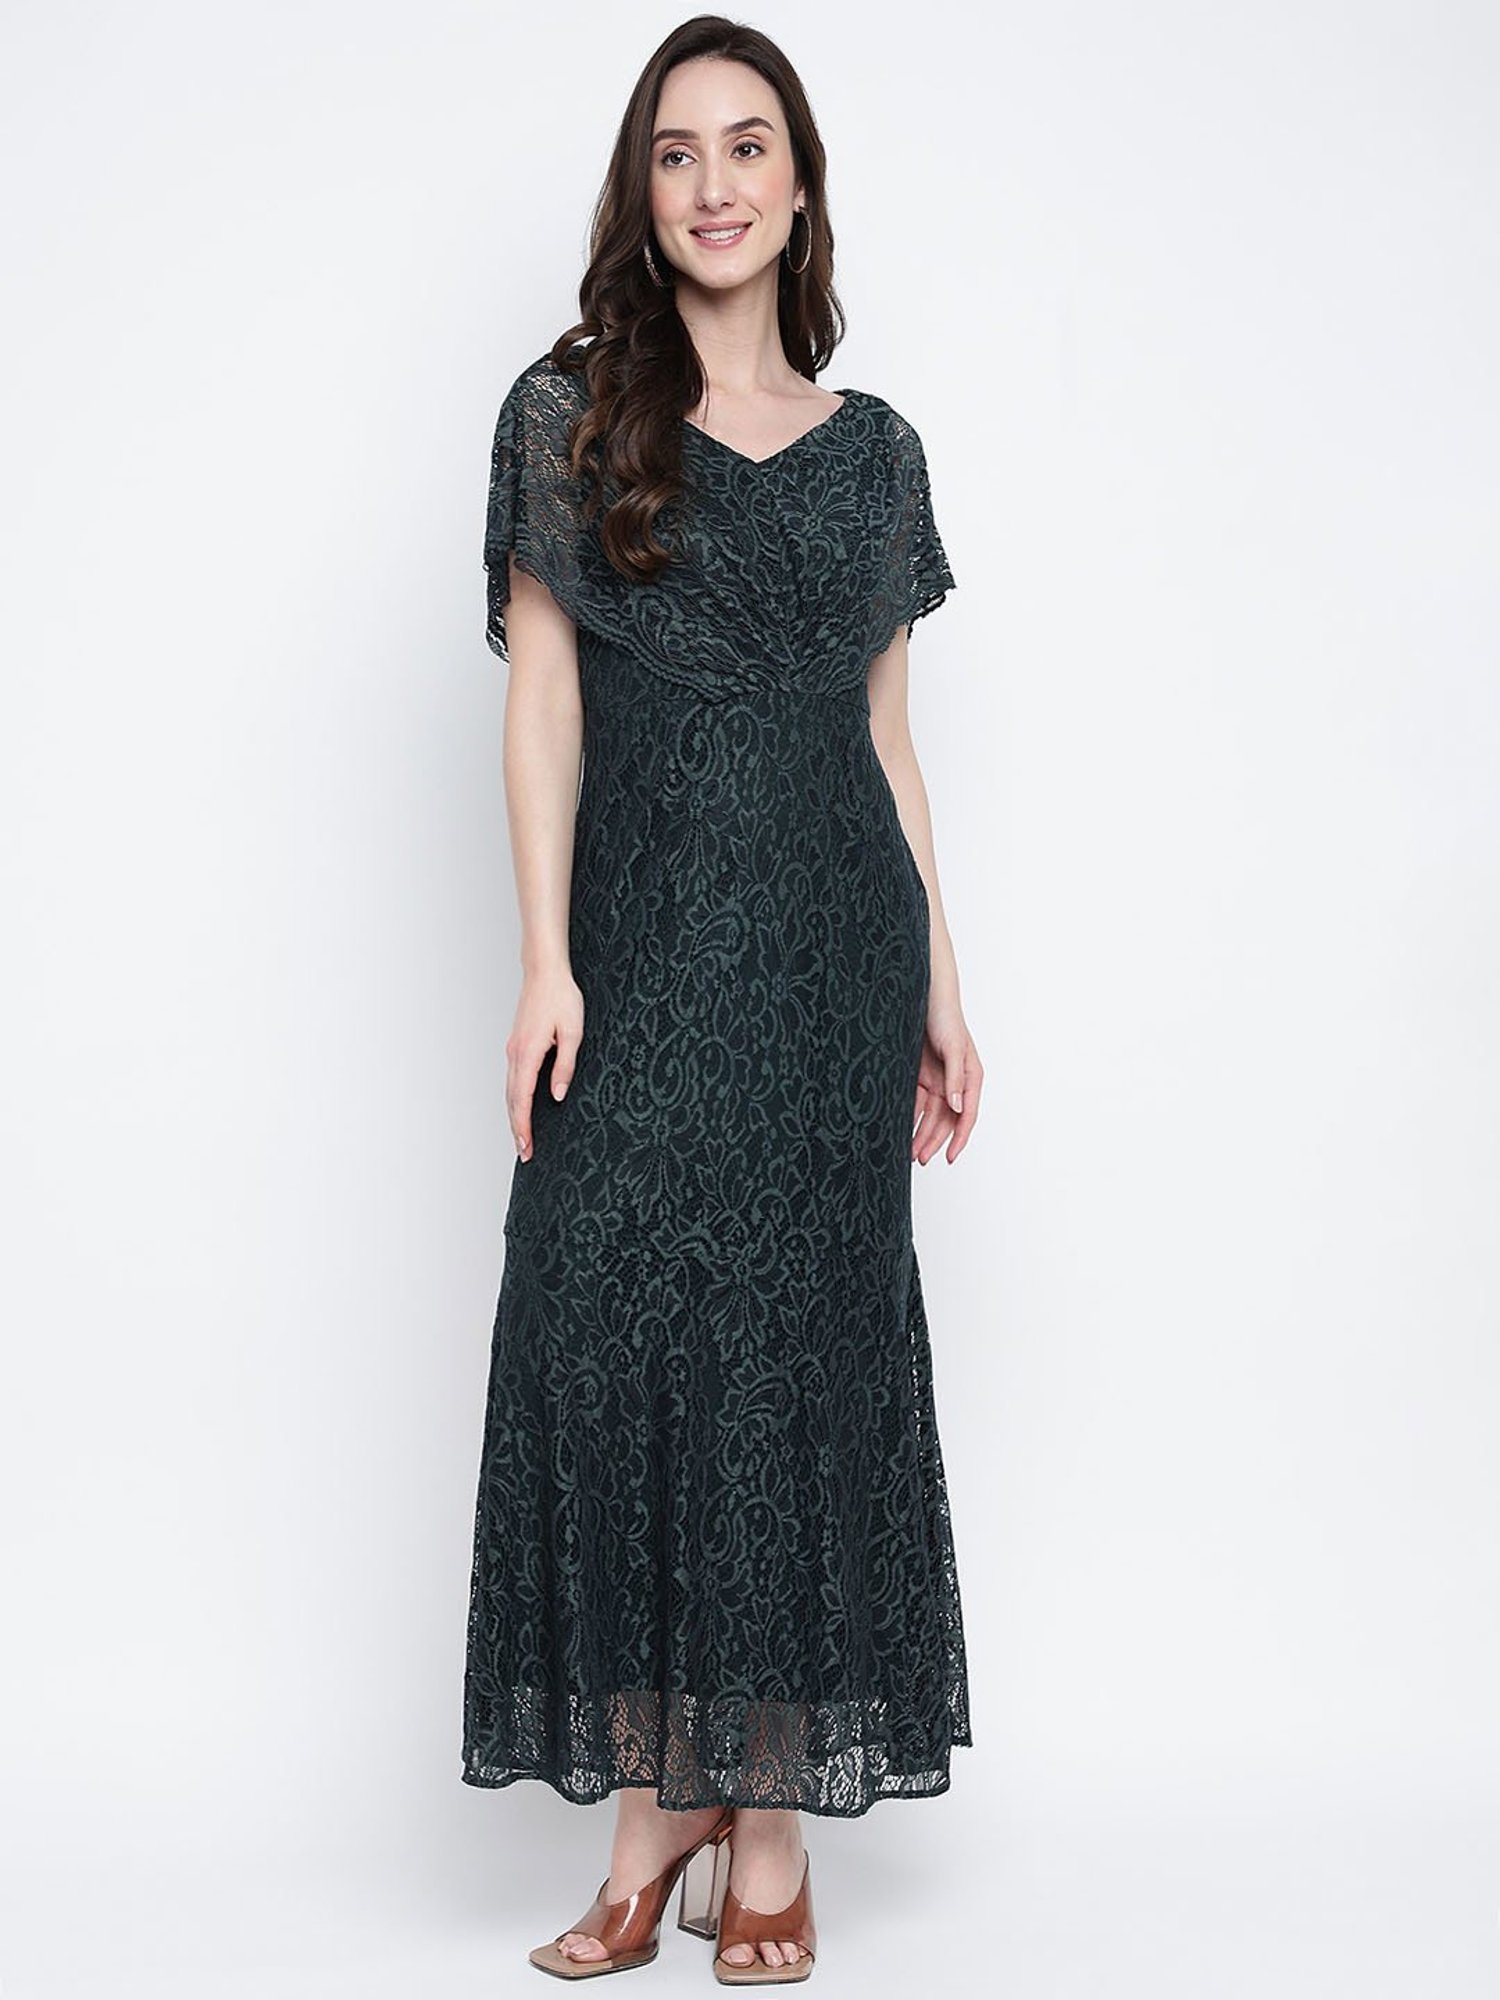 Green Embellished Ankle-Length Party Women Flared Fit Dress - Selling Fast  at Pantaloons.com